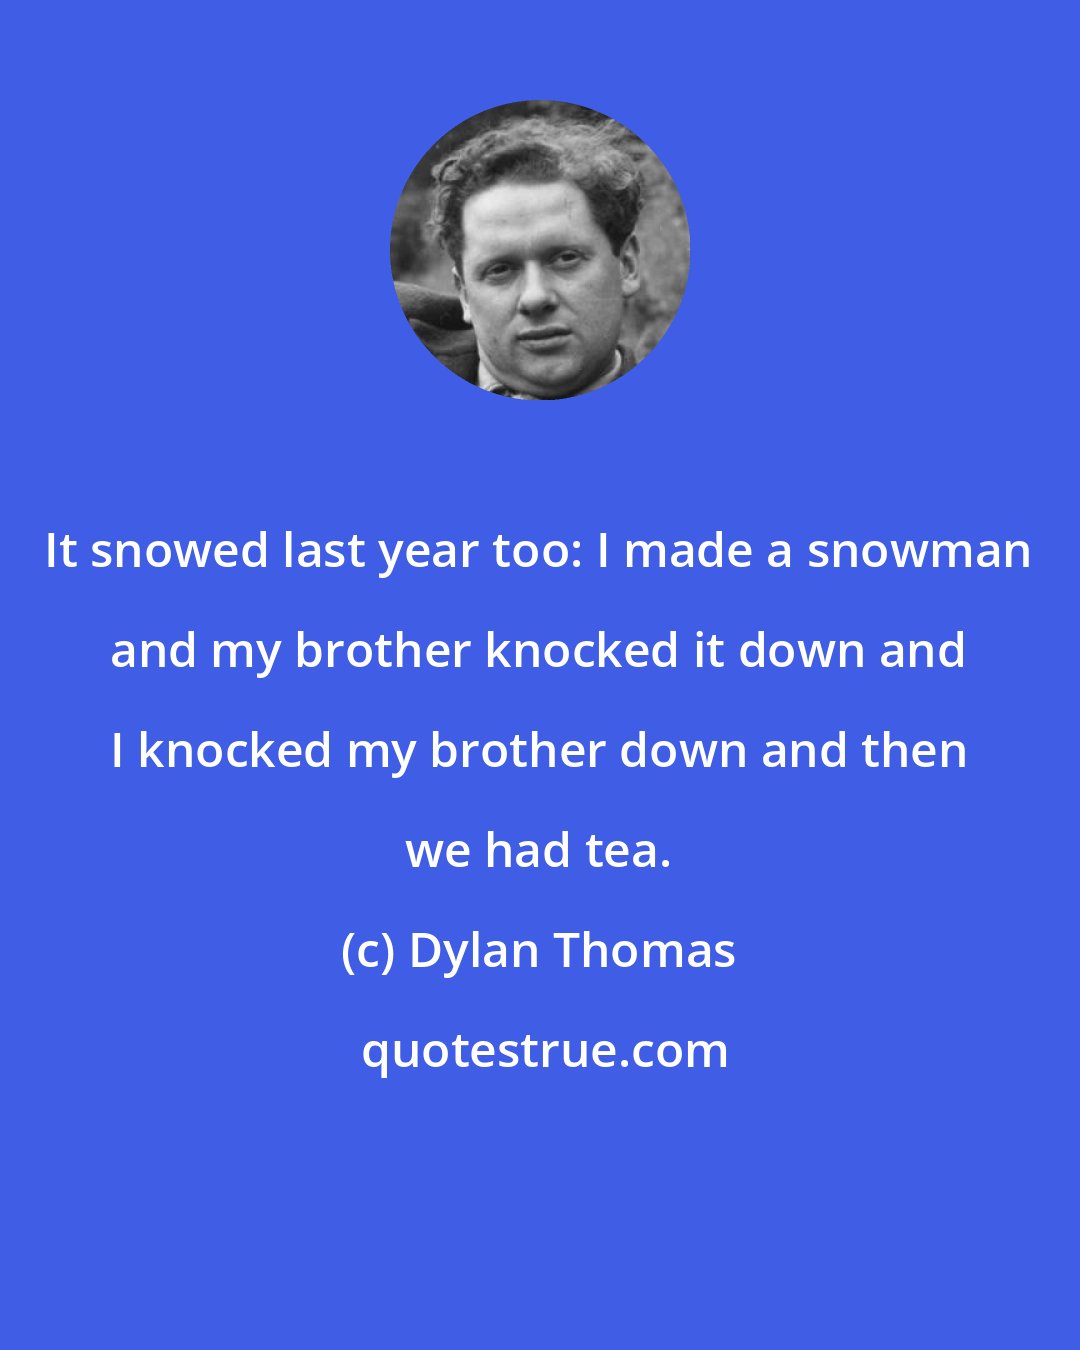 Dylan Thomas: It snowed last year too: I made a snowman and my brother knocked it down and I knocked my brother down and then we had tea.